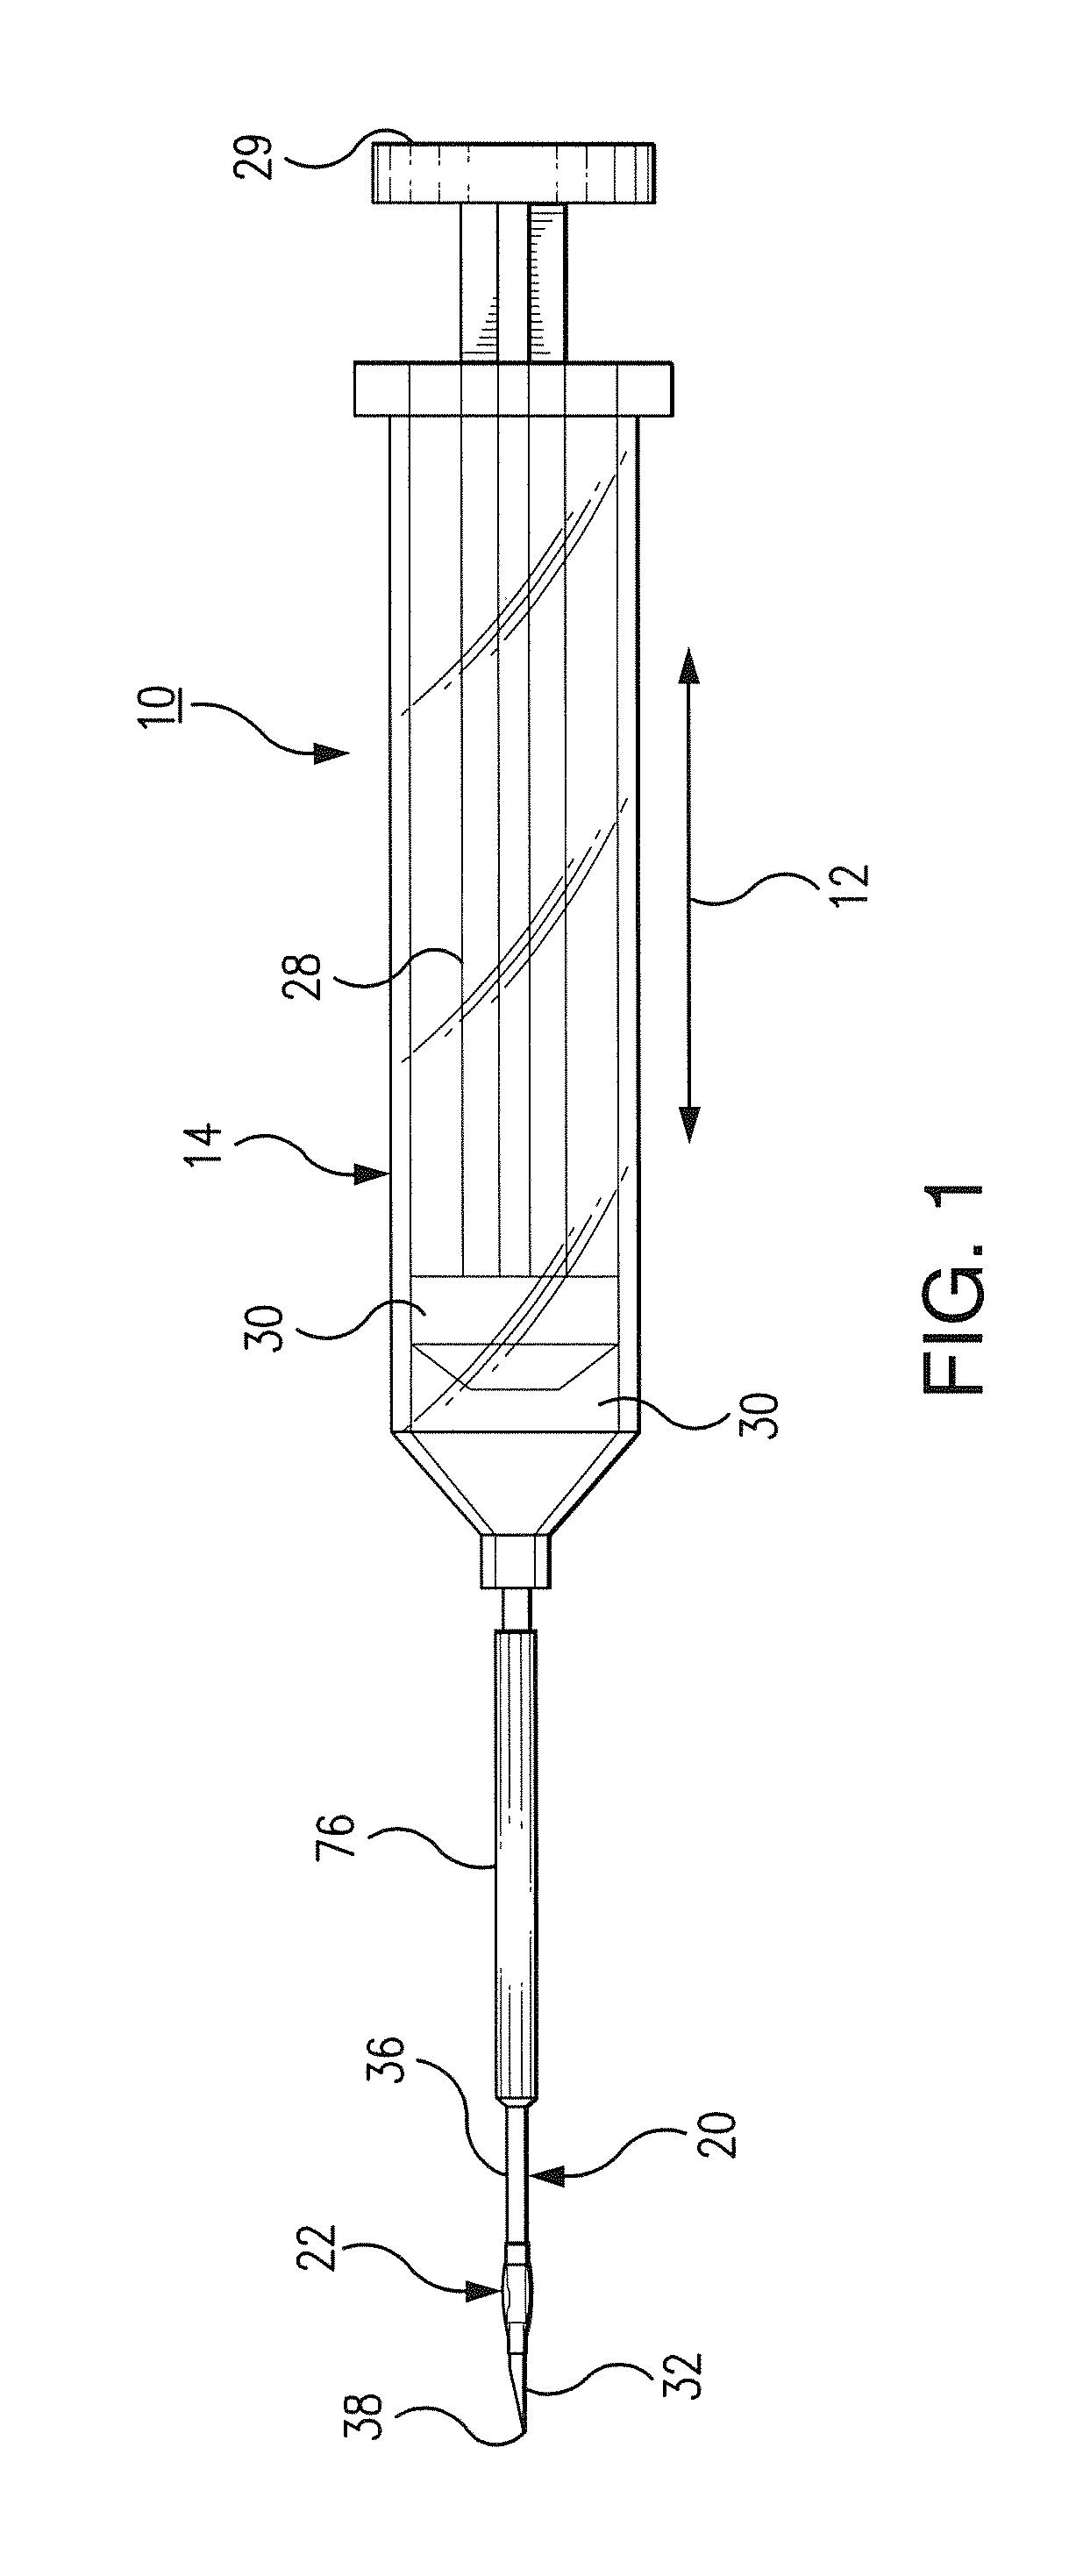 Bioresorbable drug eluting intravitreal implant system and method